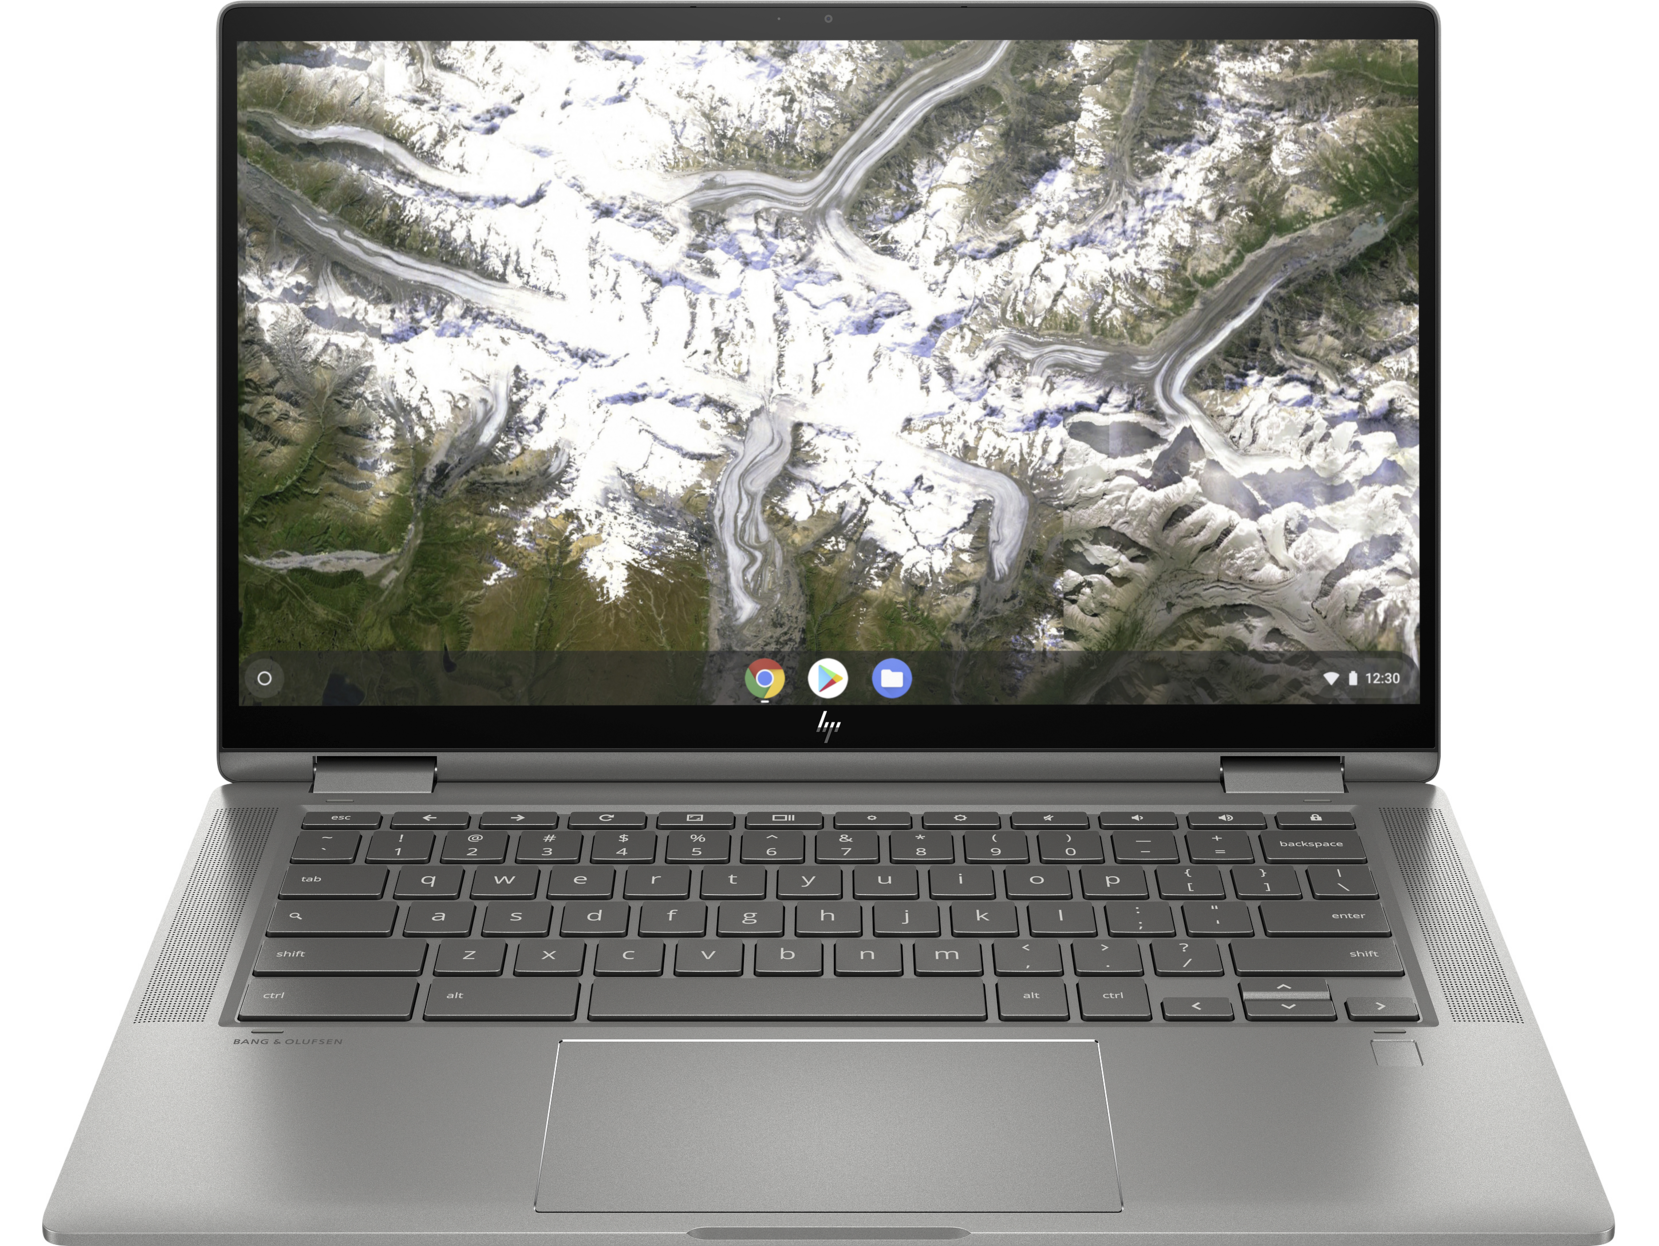 New HP Chromebook x360 14c gets beefed up with 11th-gen Core i3 and i5 processors